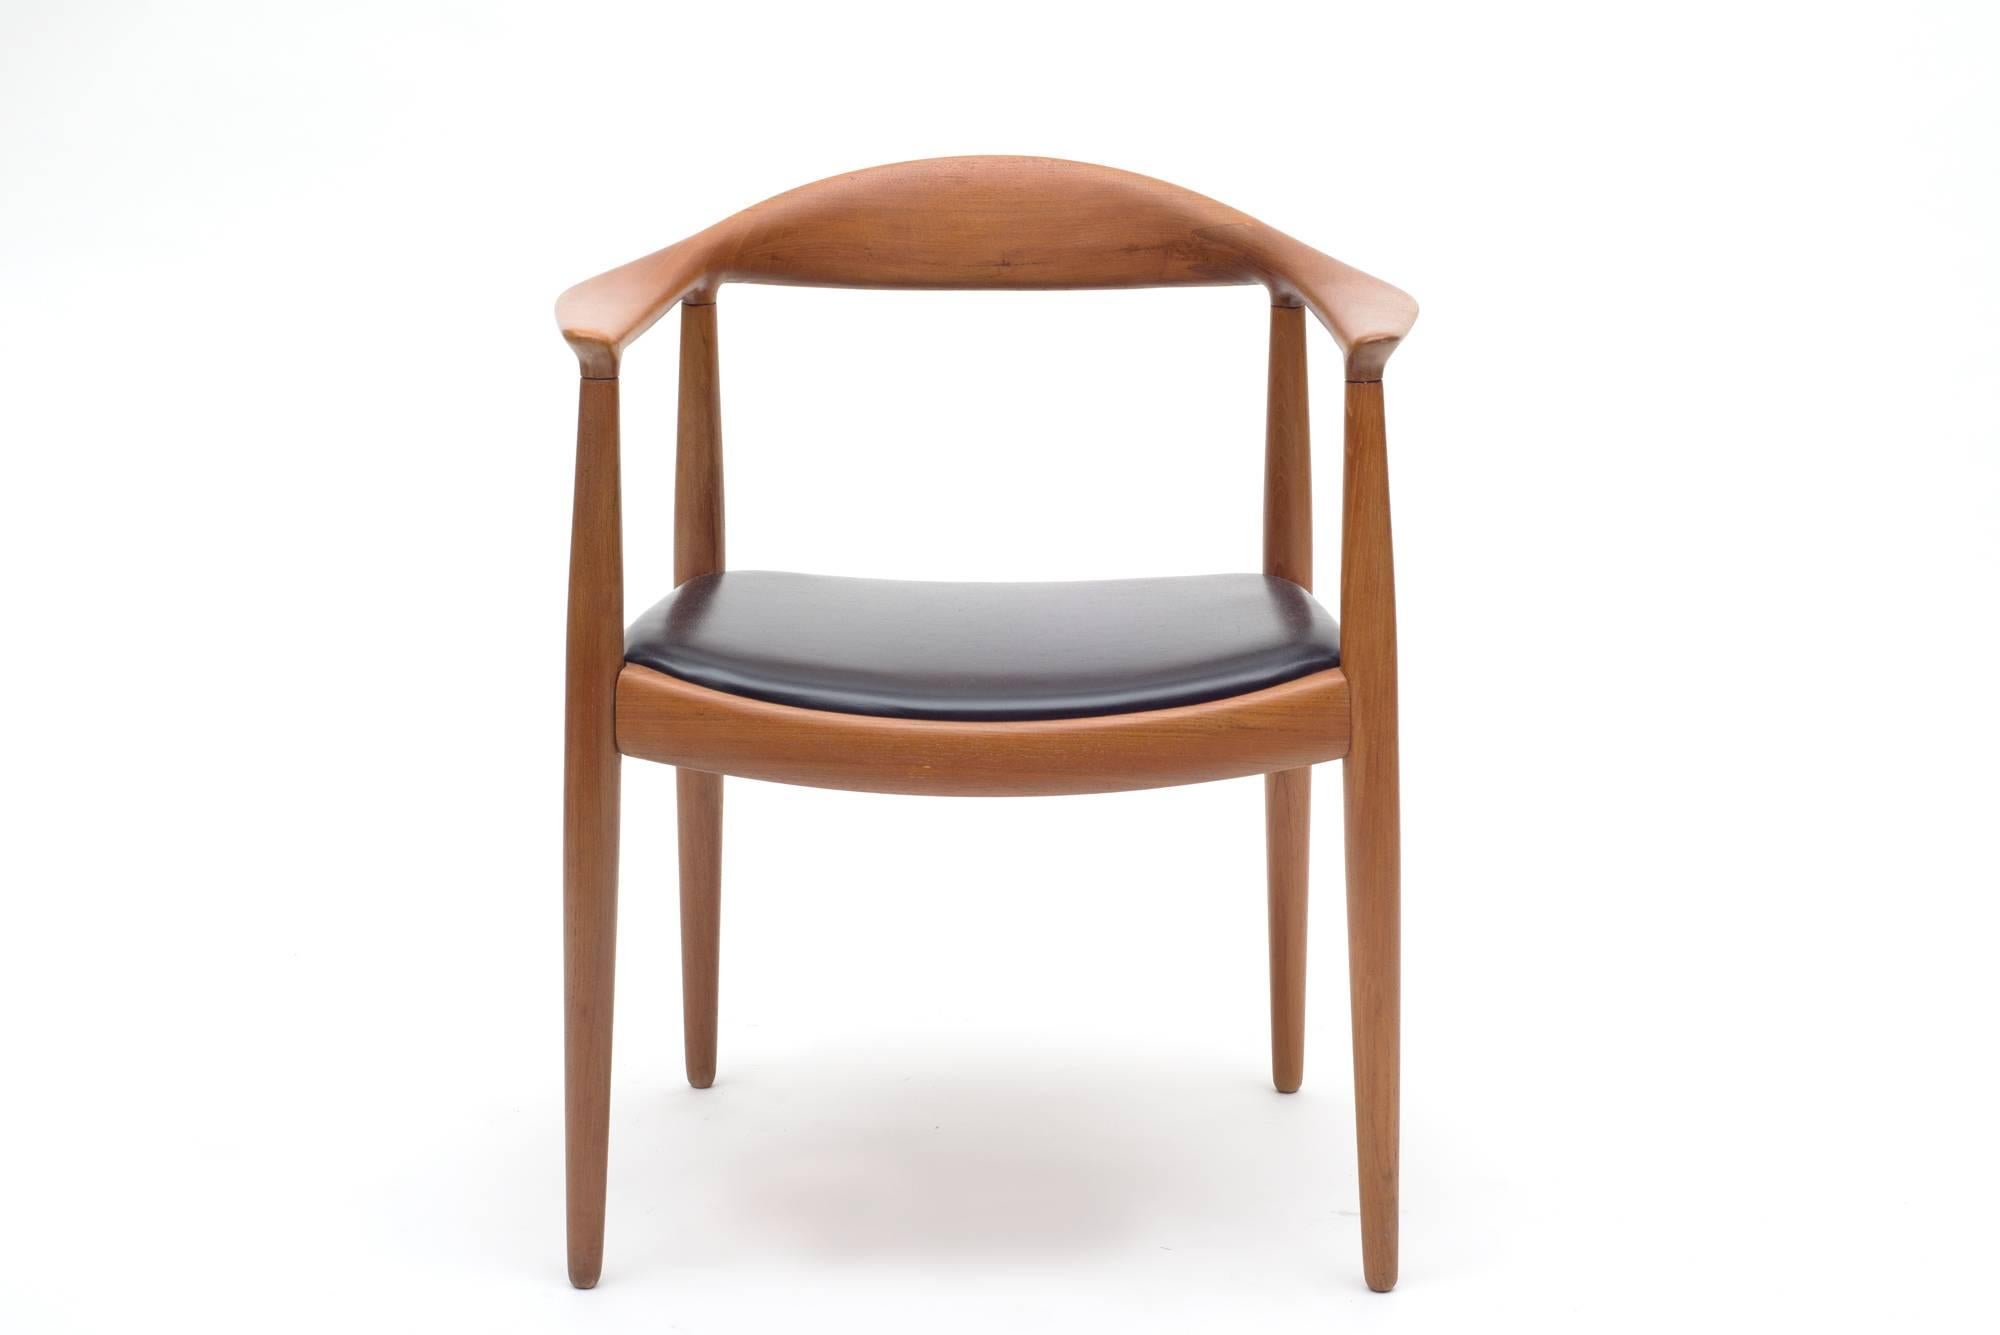 Hand-carved teak frames with distinctive joinery create a sophisticated simplicity found in the best Danish design. Branded with Johannes Hansen marks, in excellent refinished condition.